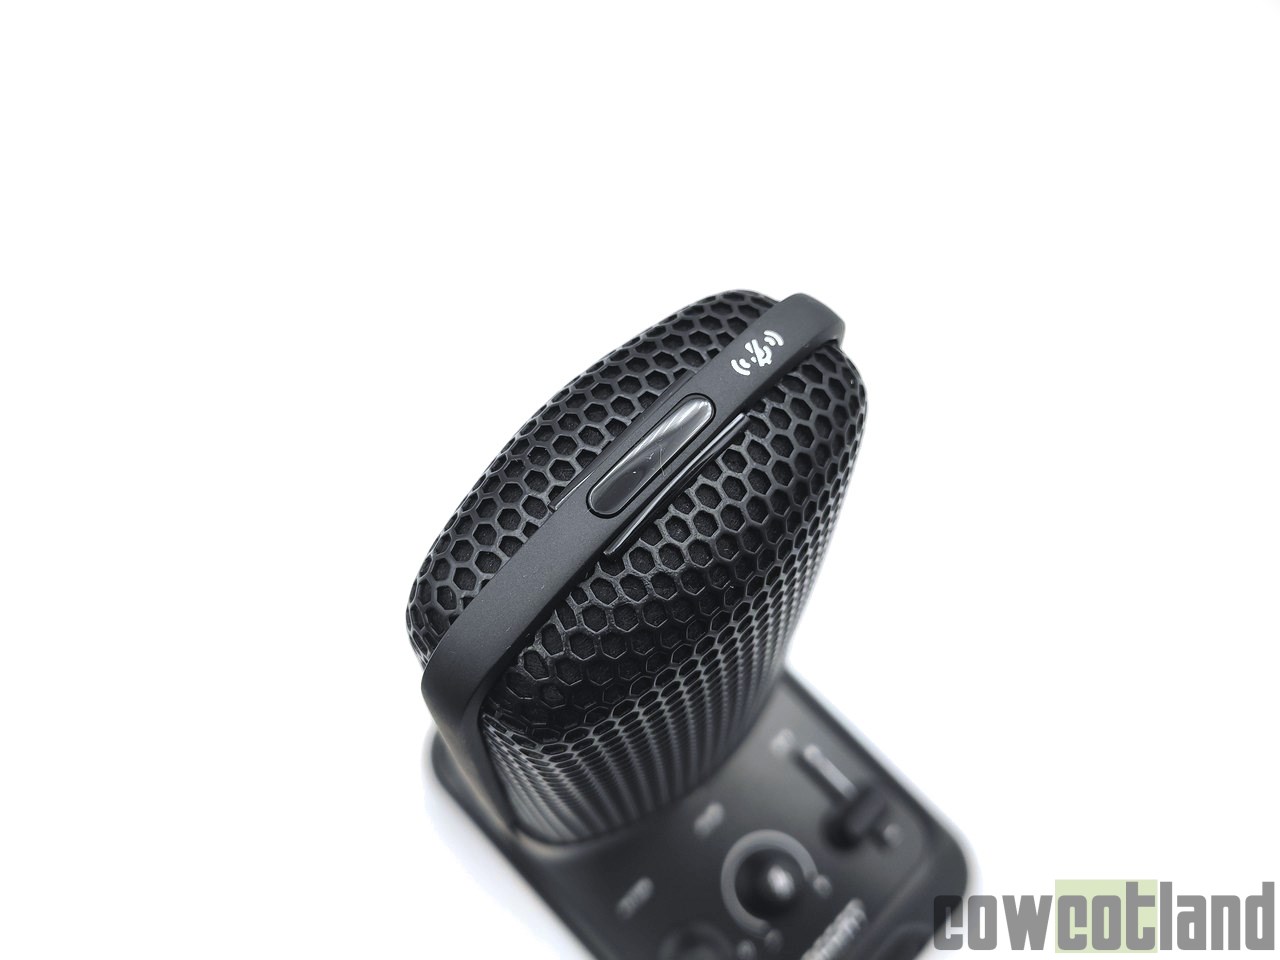 Image 45870, galerie Test micro ROCCAT Torch : ROCCAT se lance dans le micro gaming et streaming 